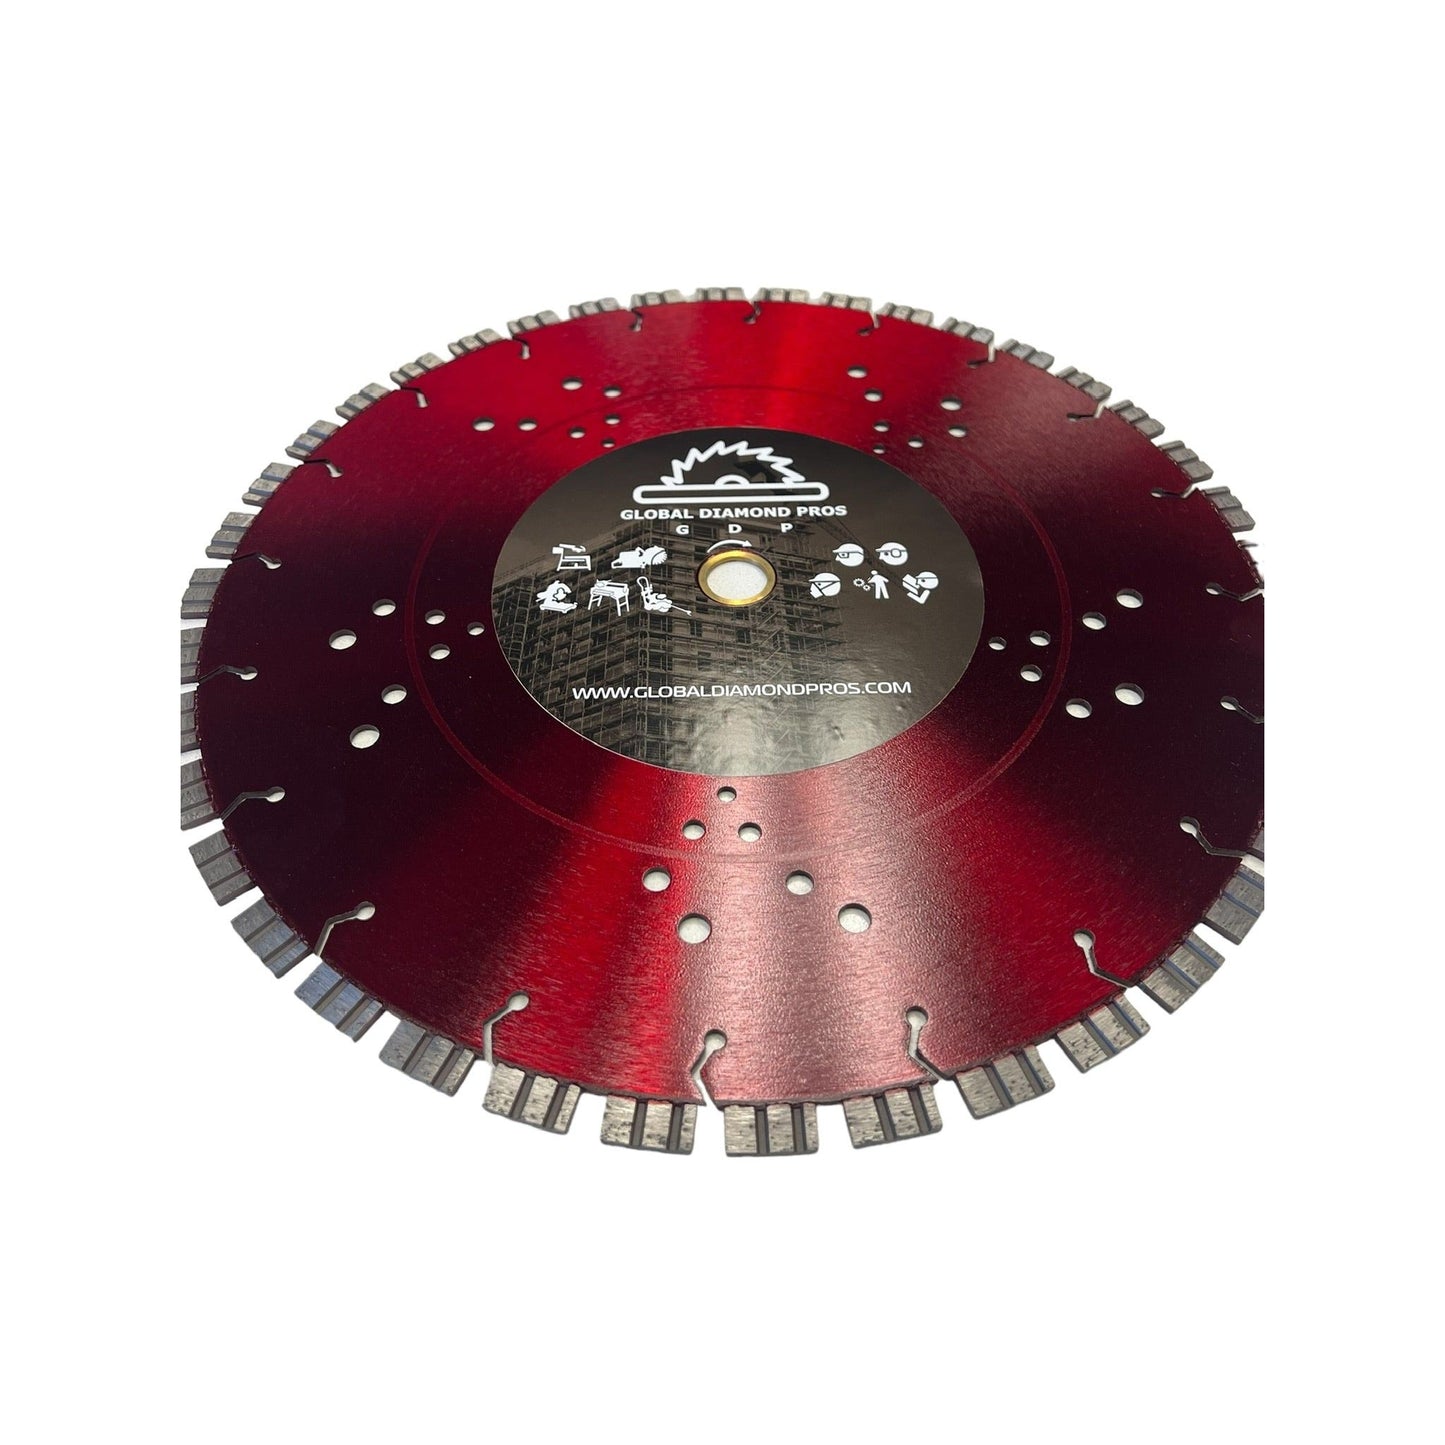 14" Turbo Diamond Saw Blade Concrete & Reinforced Concrete - Dual Flat Segments - Laser Welded - Fast Cutting - Cooled Core - Wet / Dry